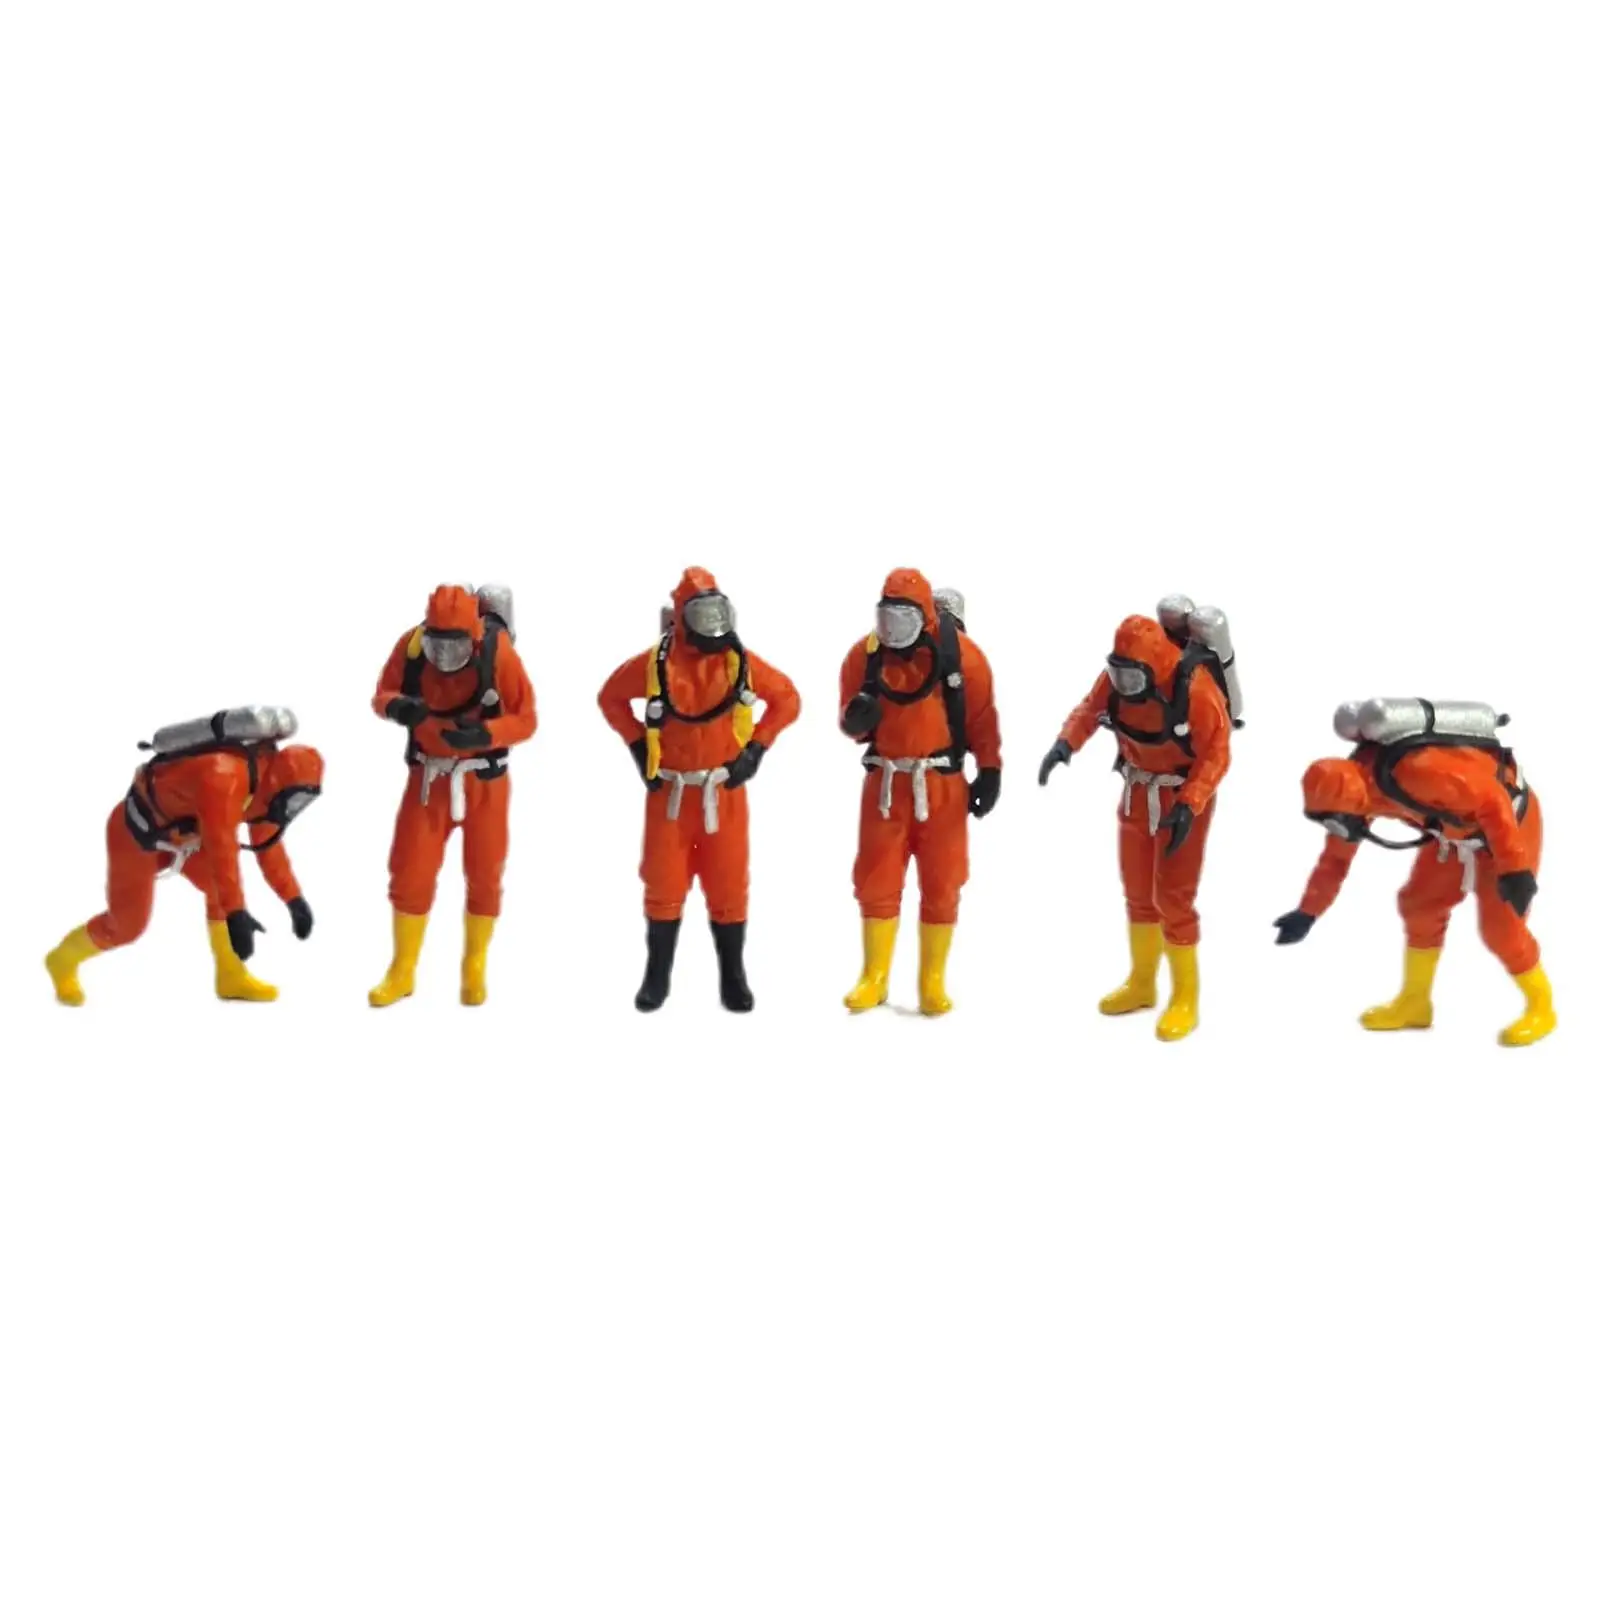 6x 1/64 Scale People Figures Collectibles DIY Crafts Fireman People Figures for Diorama Dollhouse Scenery Landscape Layout Decor